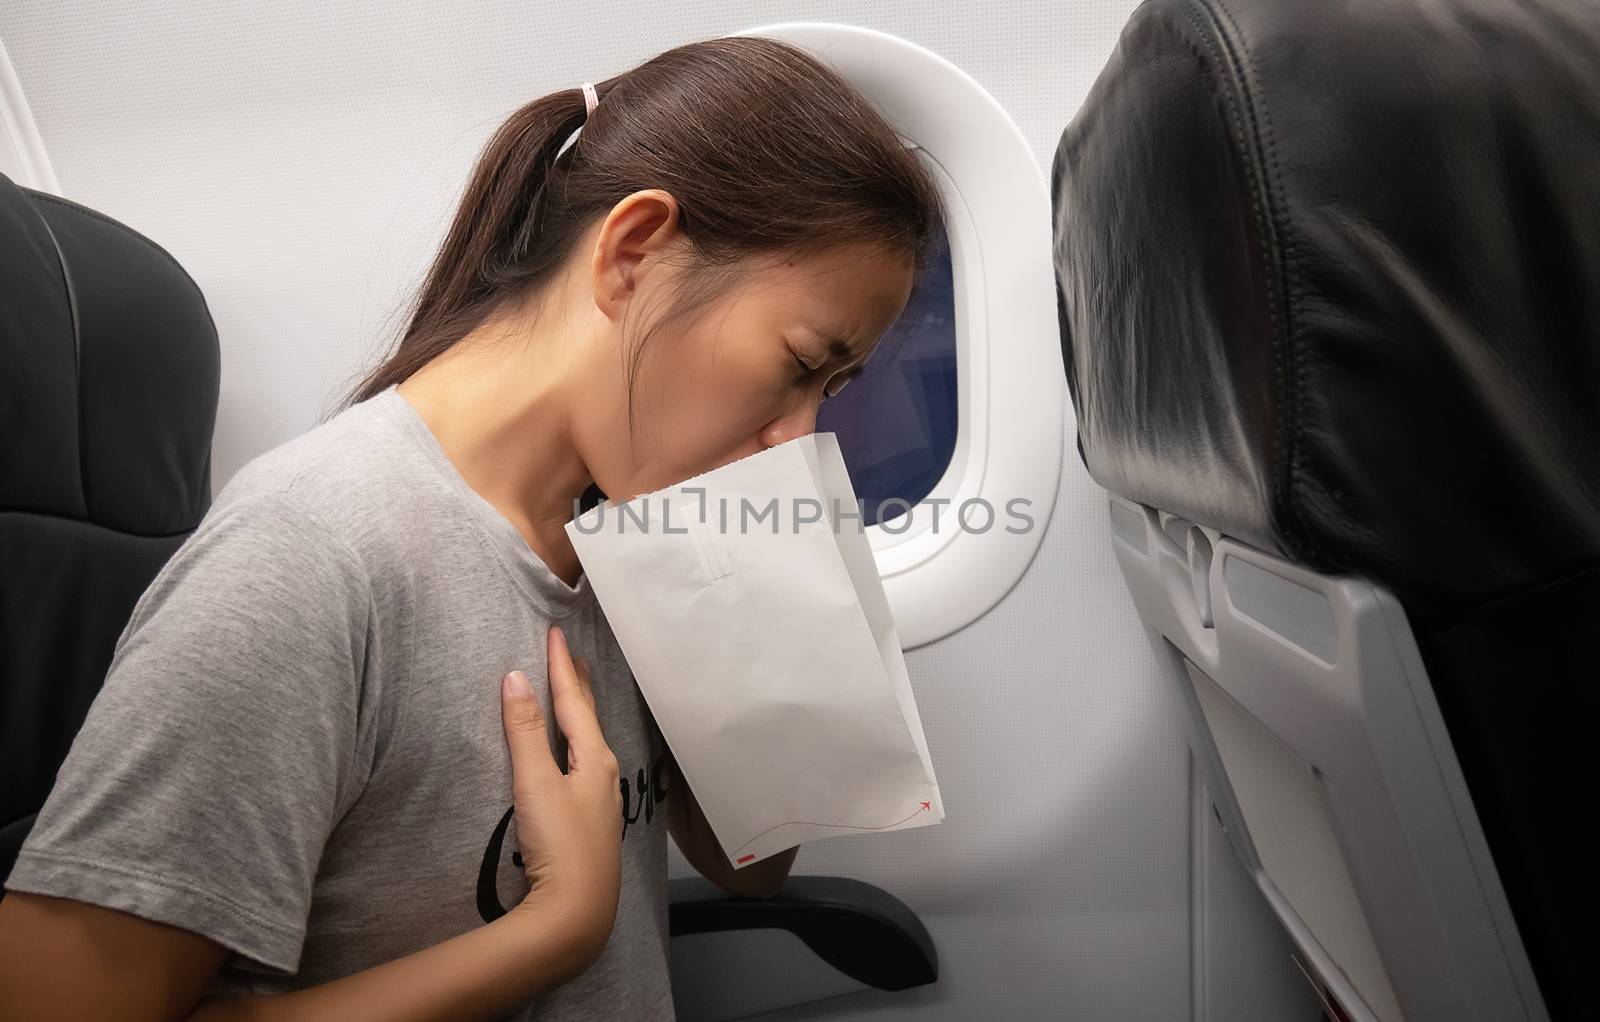 female passenger on the plane felt airsick, affected with nausea by asiandelight